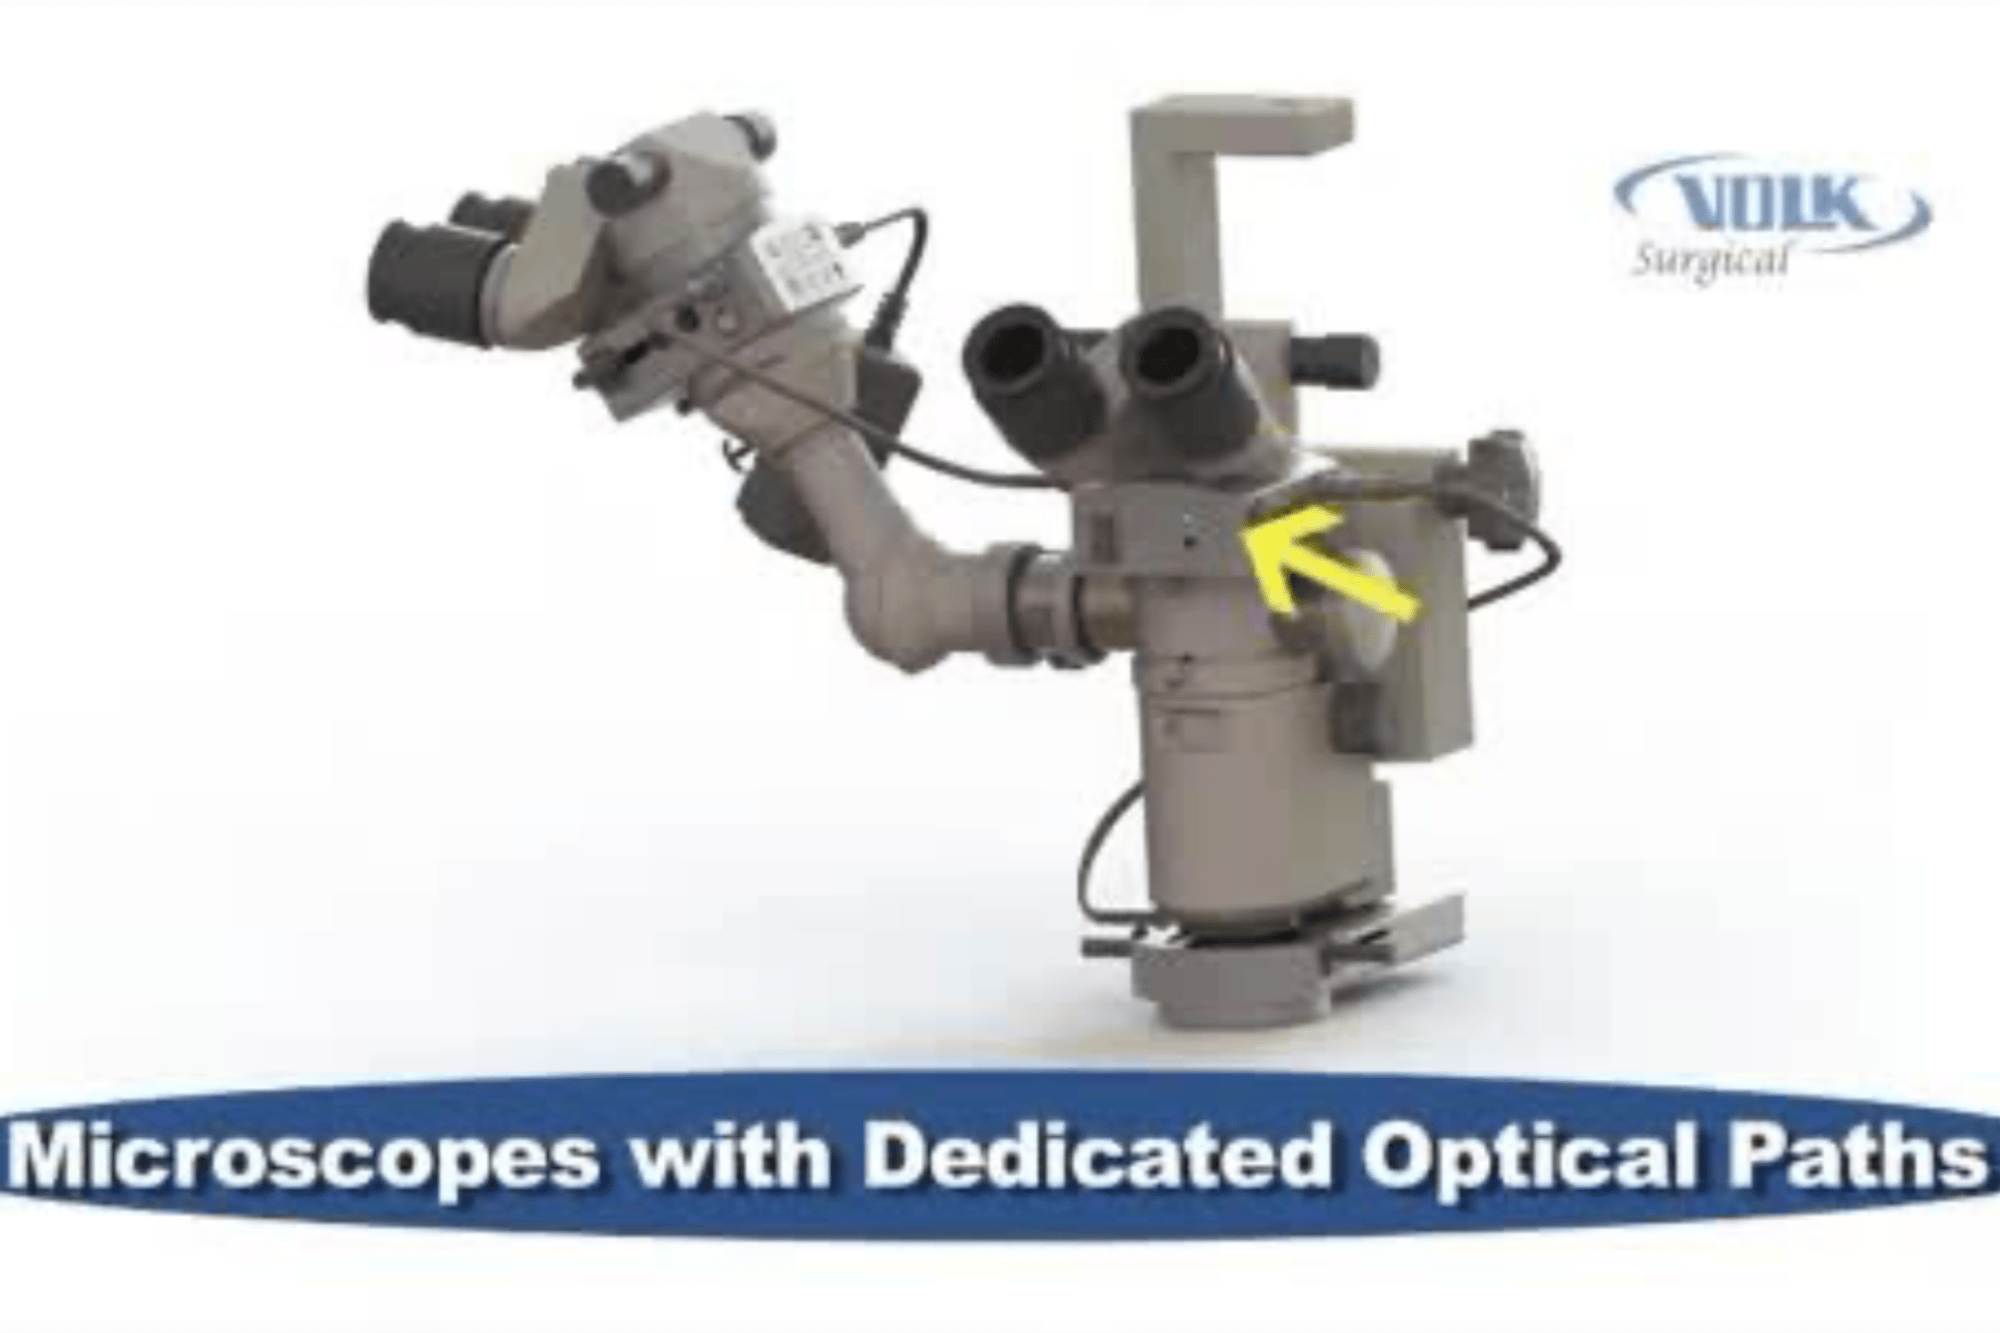 Microscopes with Paths